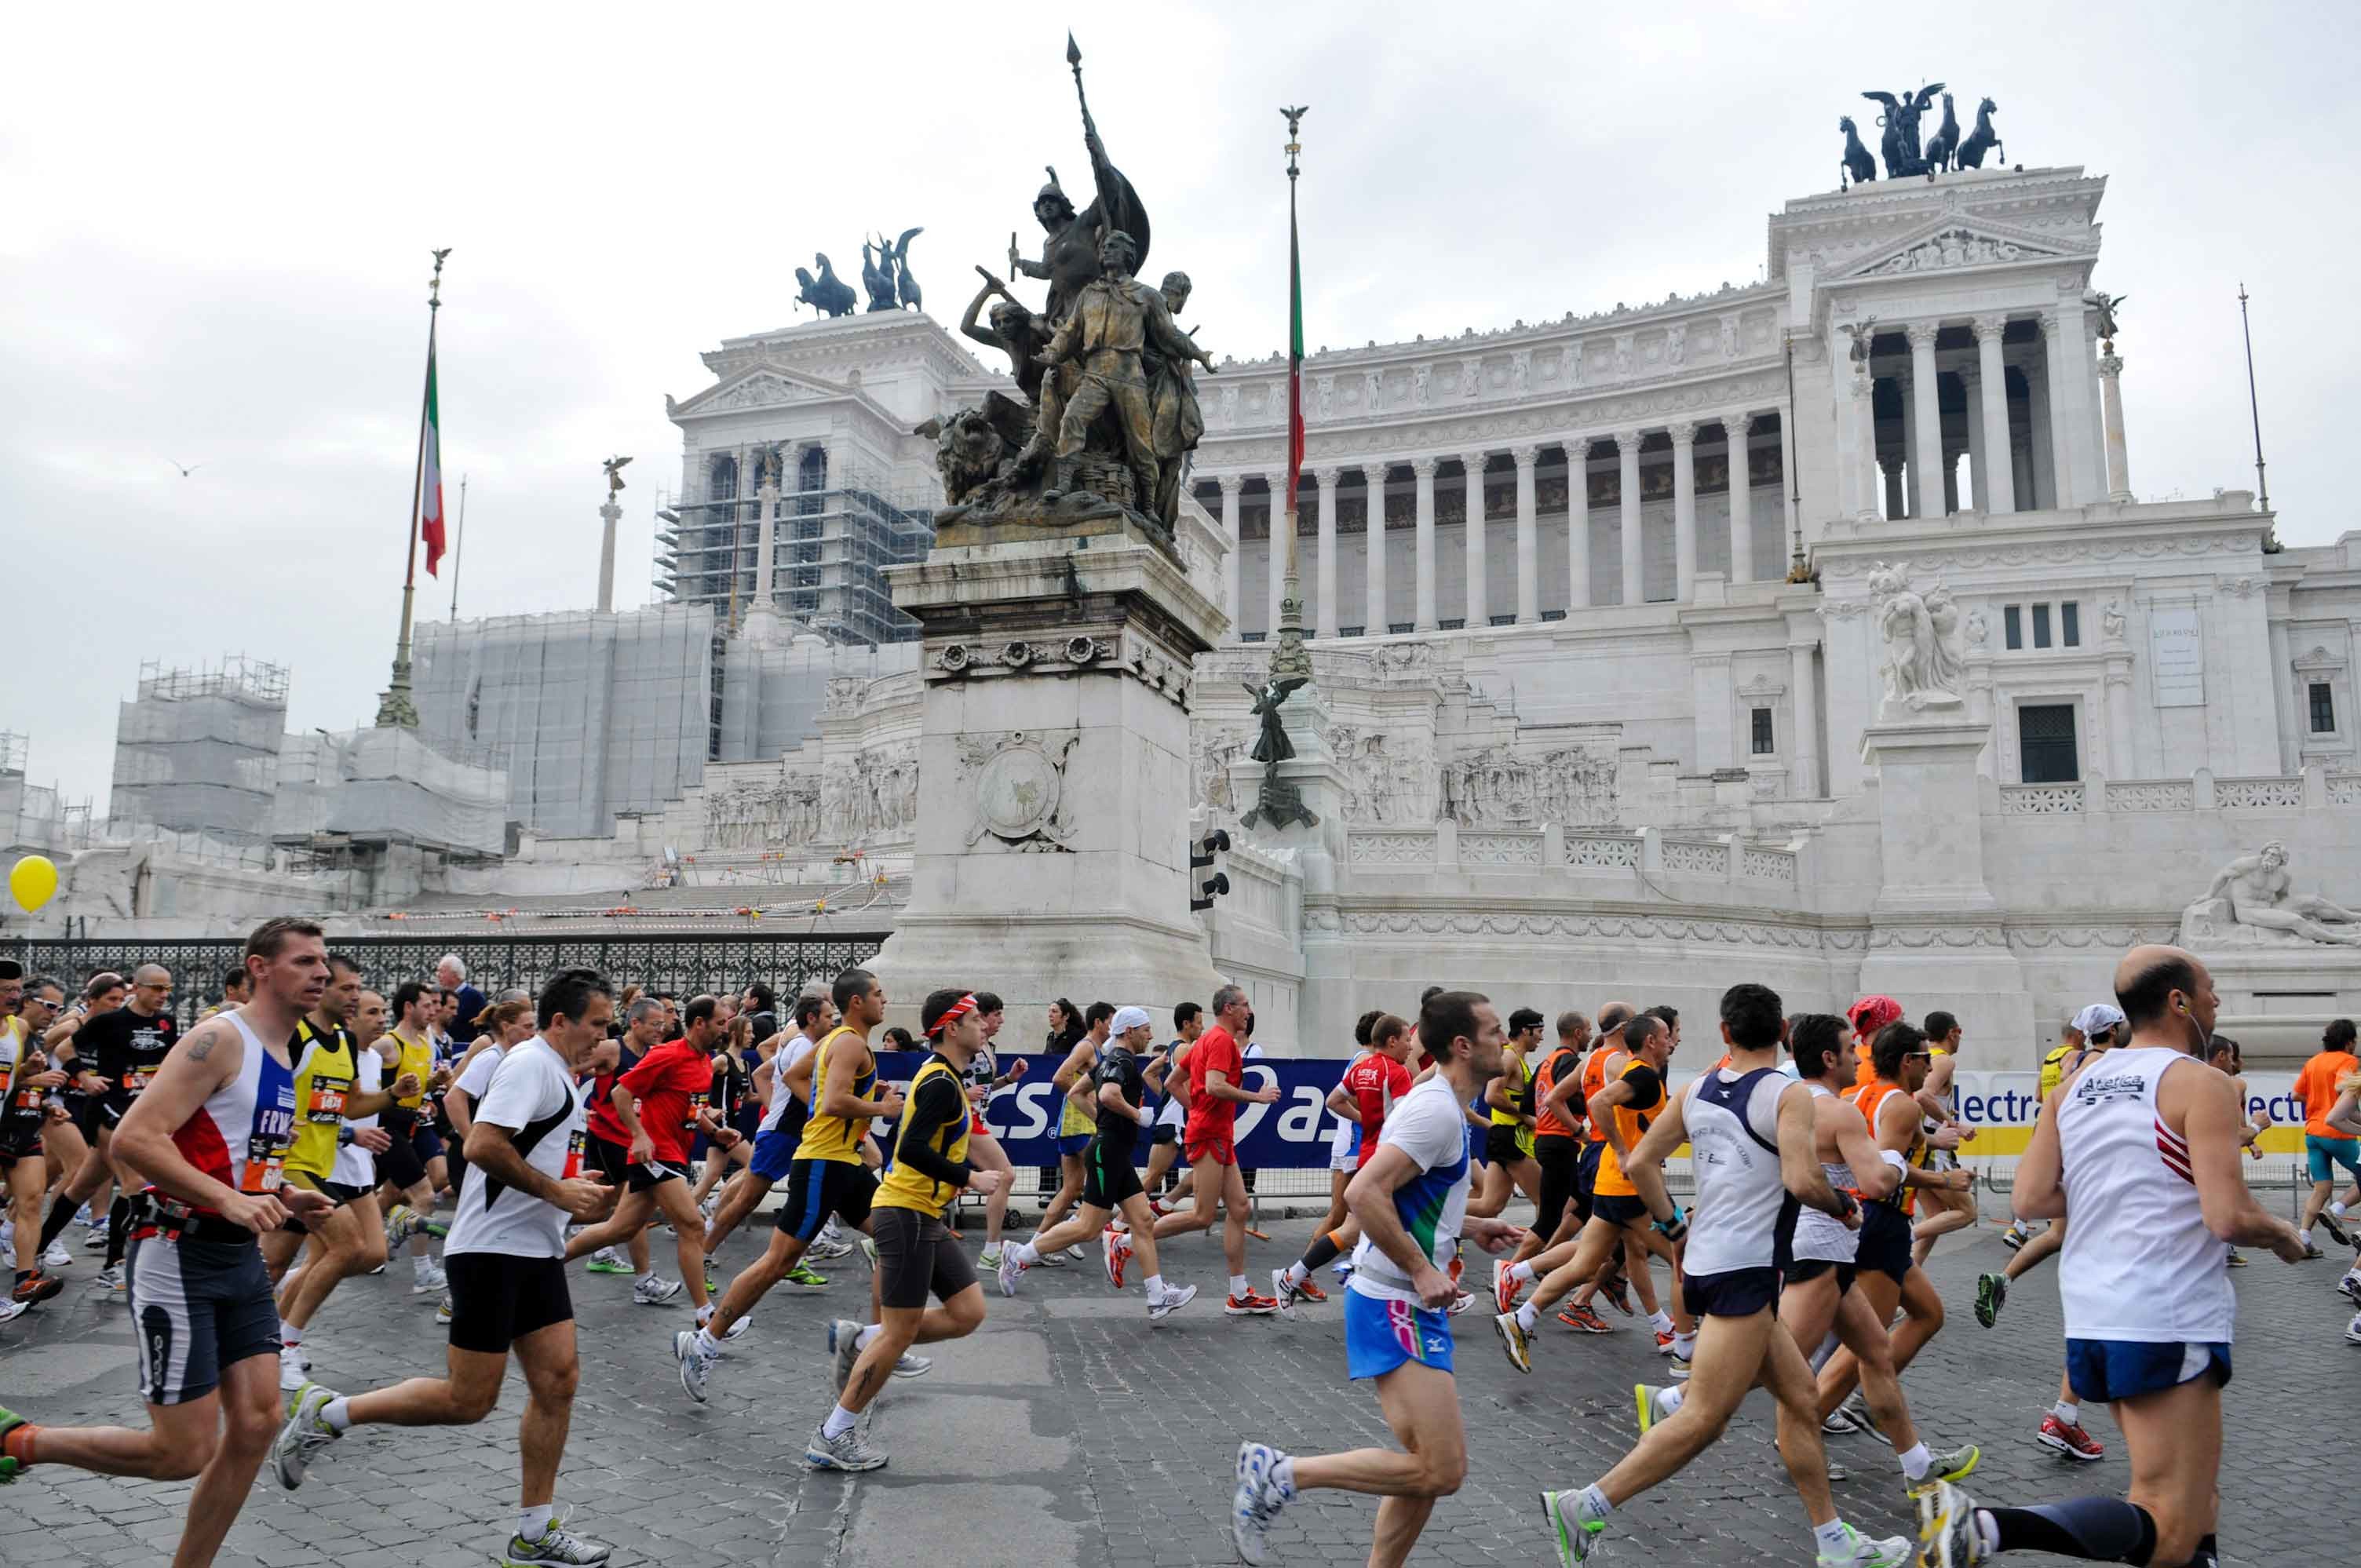 A strong Elite Field will take on the 24th Annual Rome Marathon